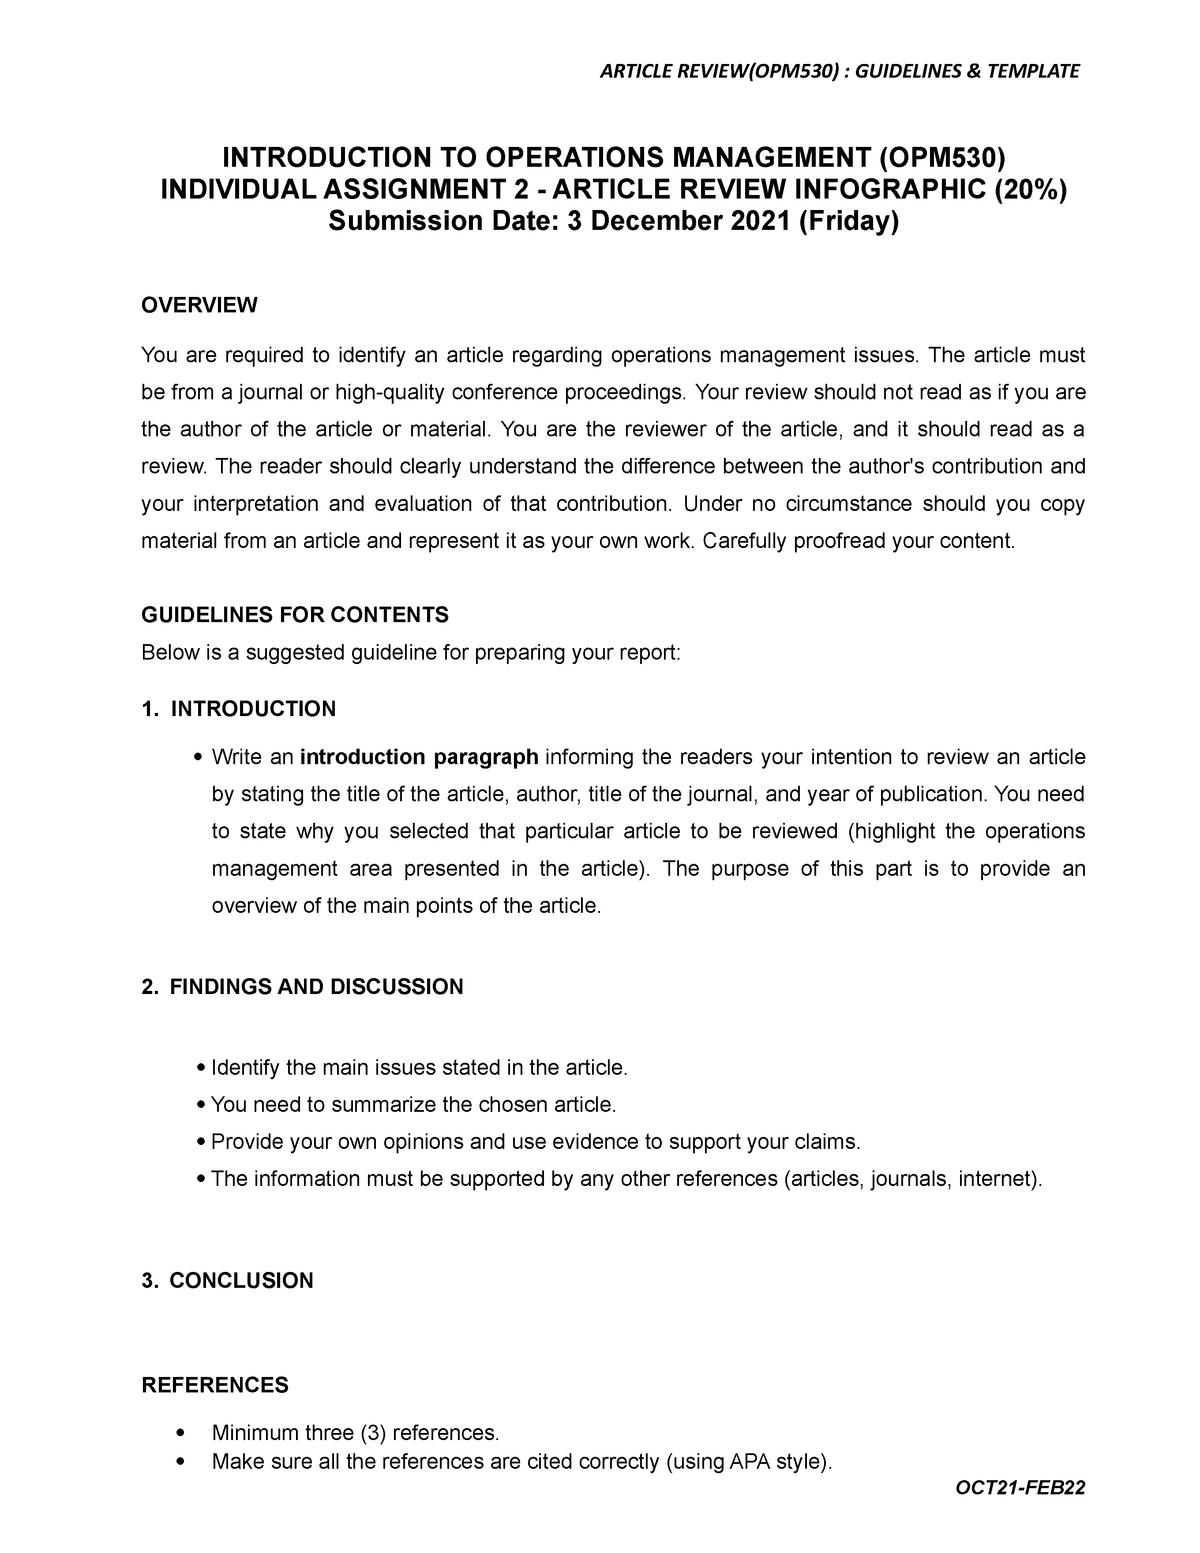 strategic management article review assignment pdf